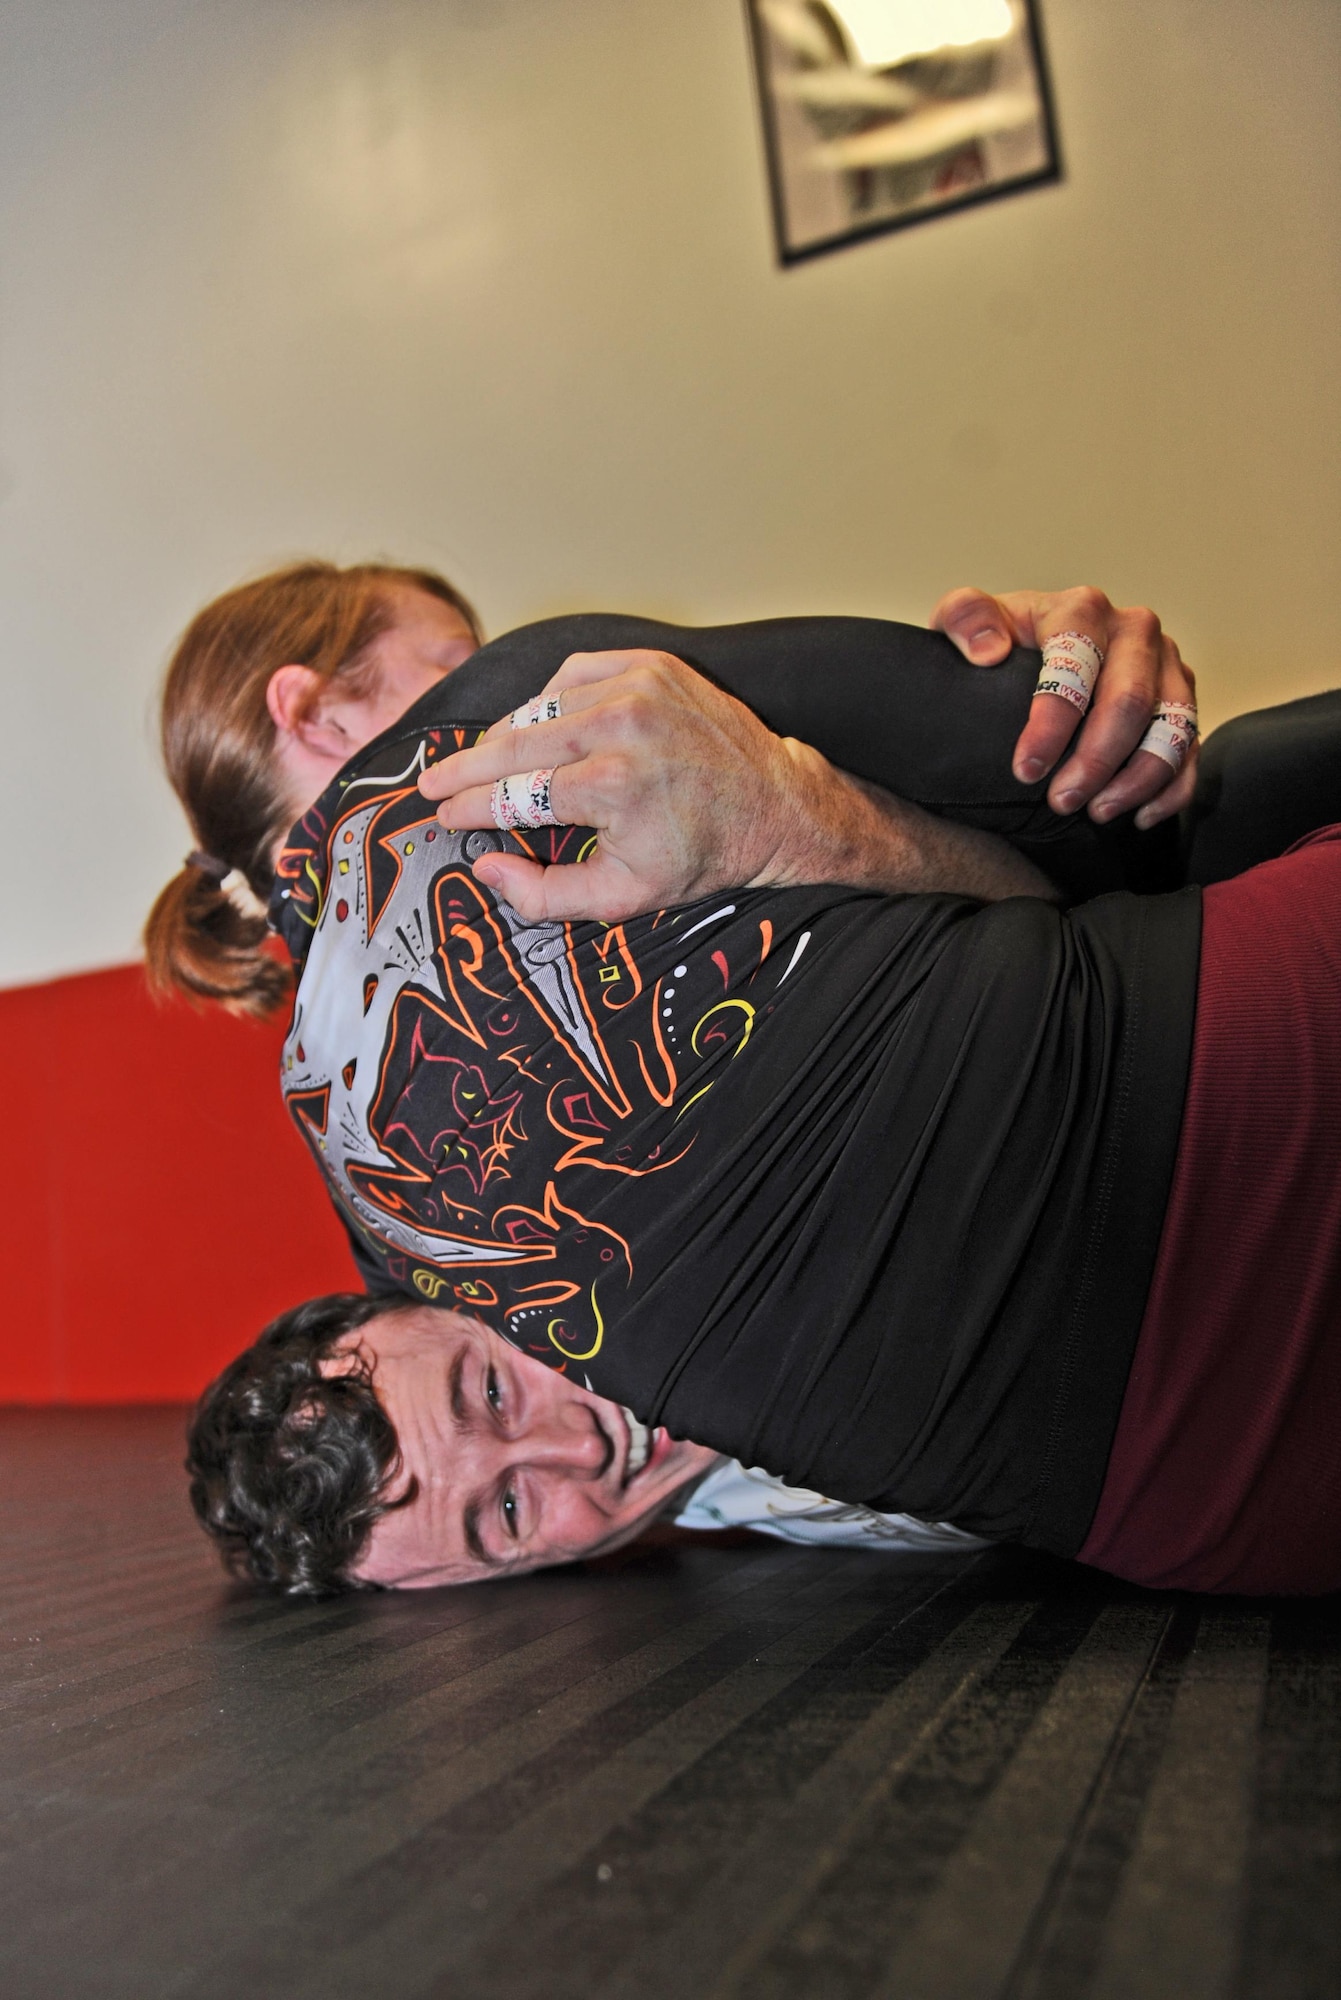 Brazilian Jiu Jitsu instructor Scott Fremming, bottom, and Melia Baxter, student, spar during a class at the fitness center on Whiteman Air Force Base, Mo., Feb. 3, 2017. The class is offered to adults and youth weekly and teaches the martial art technique of ground fighting. (U.S. Air Force photo by Tech. Sgt. Miguel Lara)